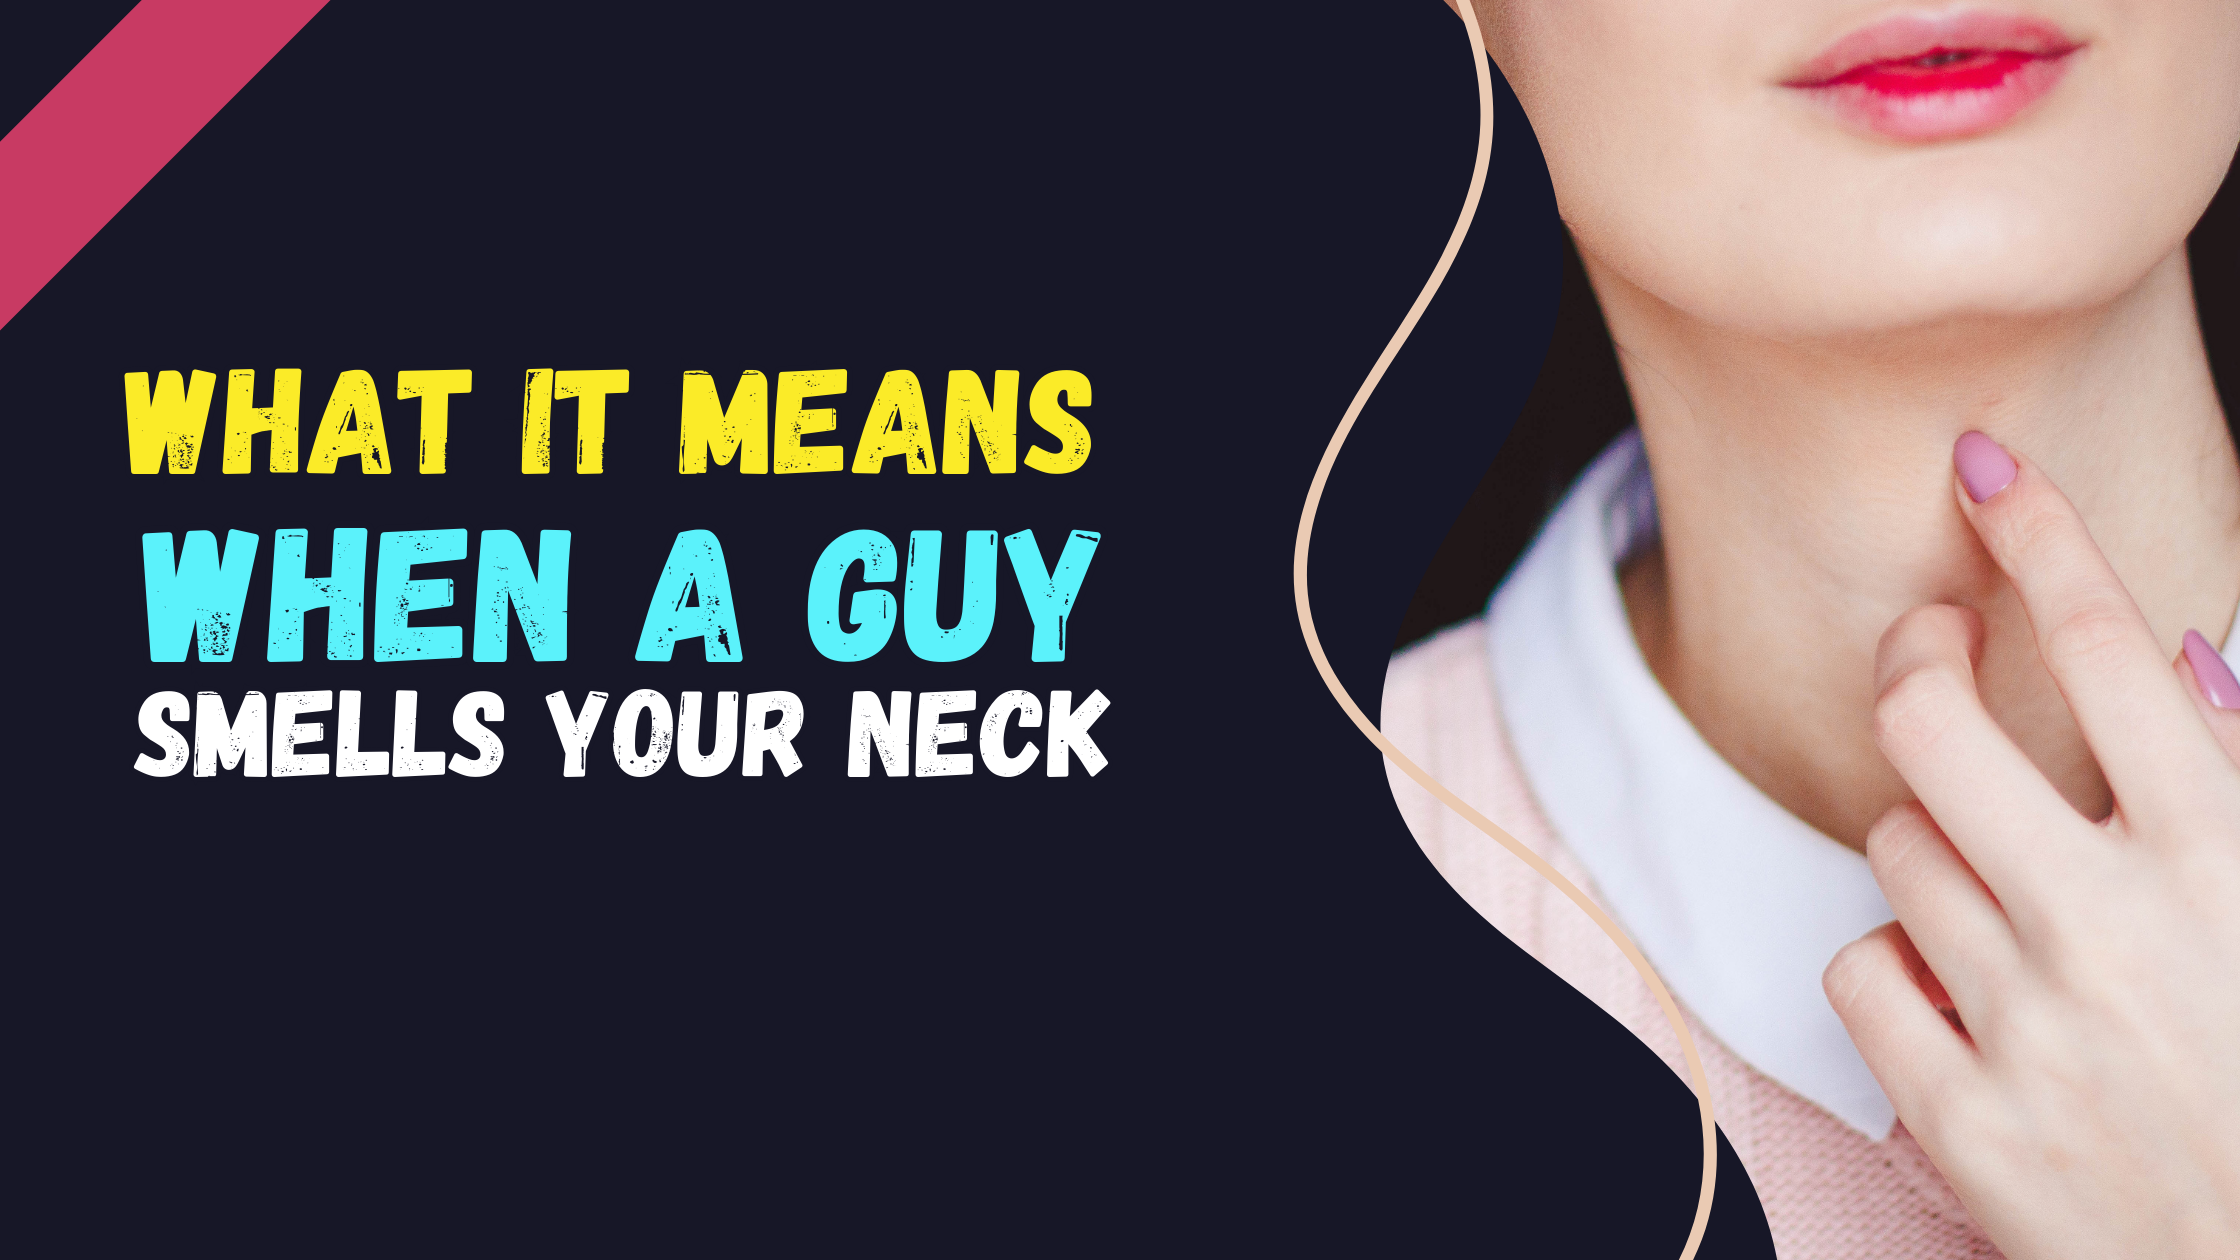 What It Means When a Guy Smells Your Neck